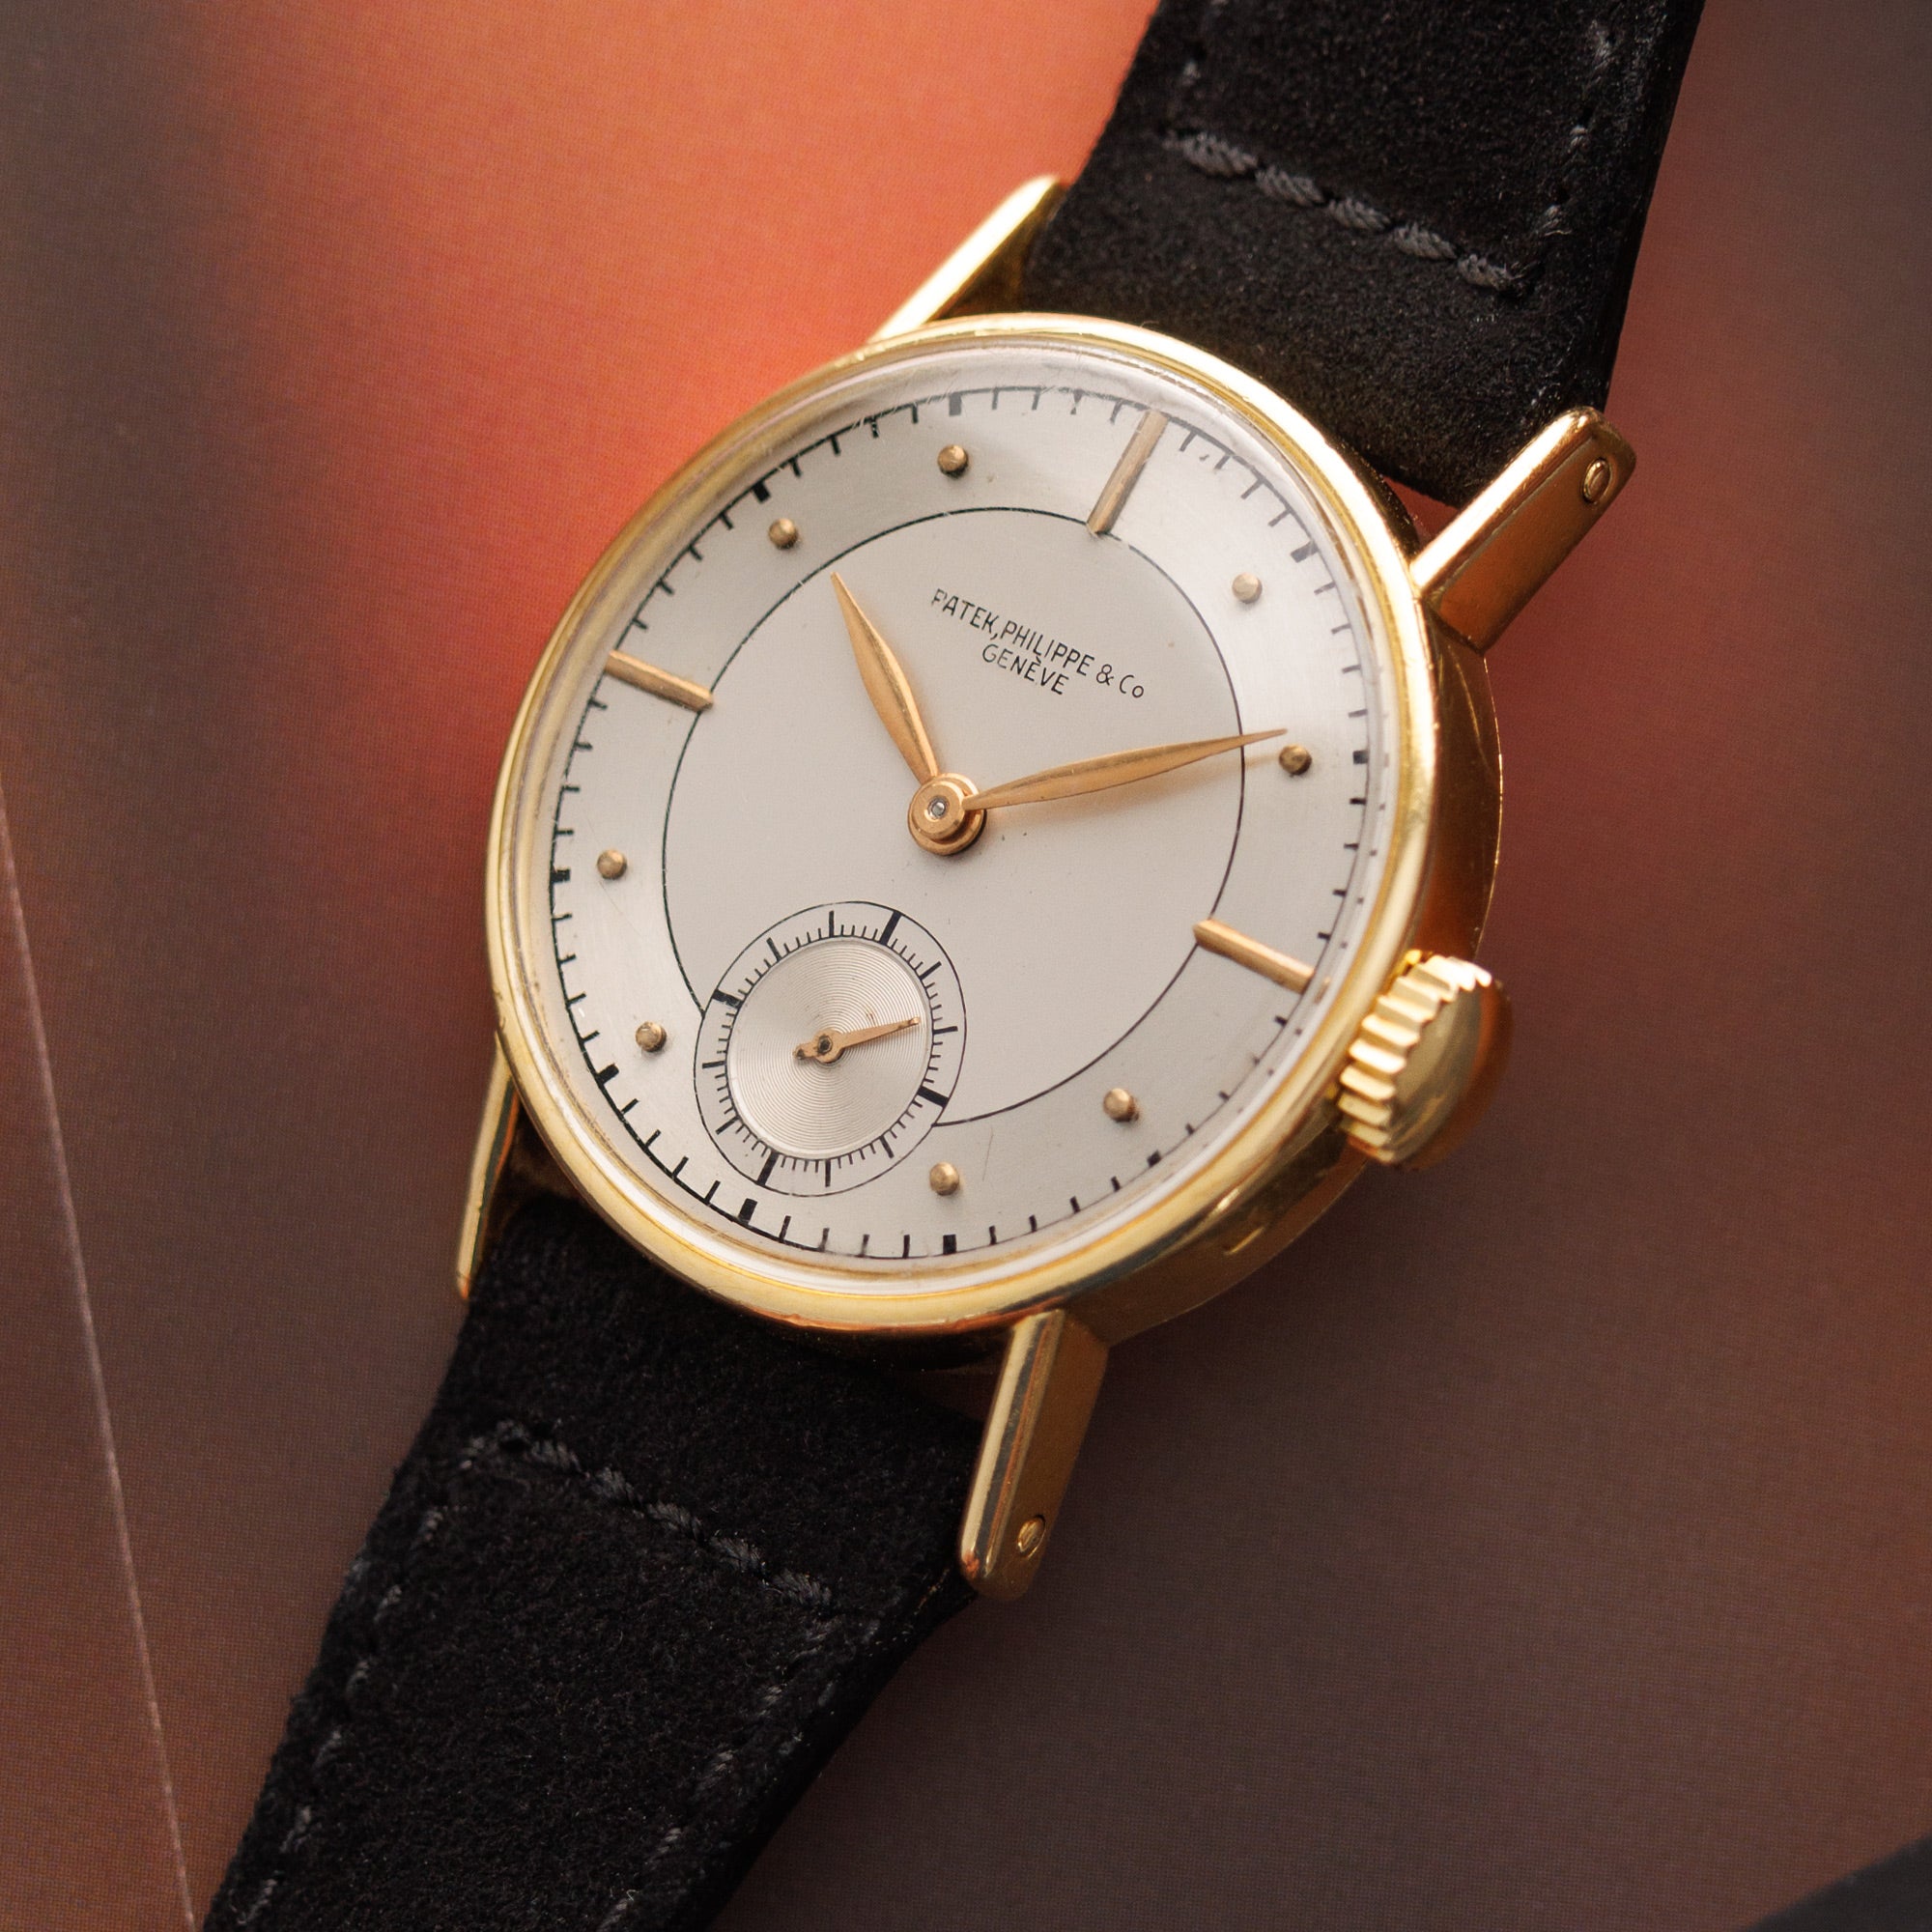 Patek Philippe - Patek Philippe Yellow Gold Calatrava Ref. 534 with Silver Sector Dial - The Keystone Watches